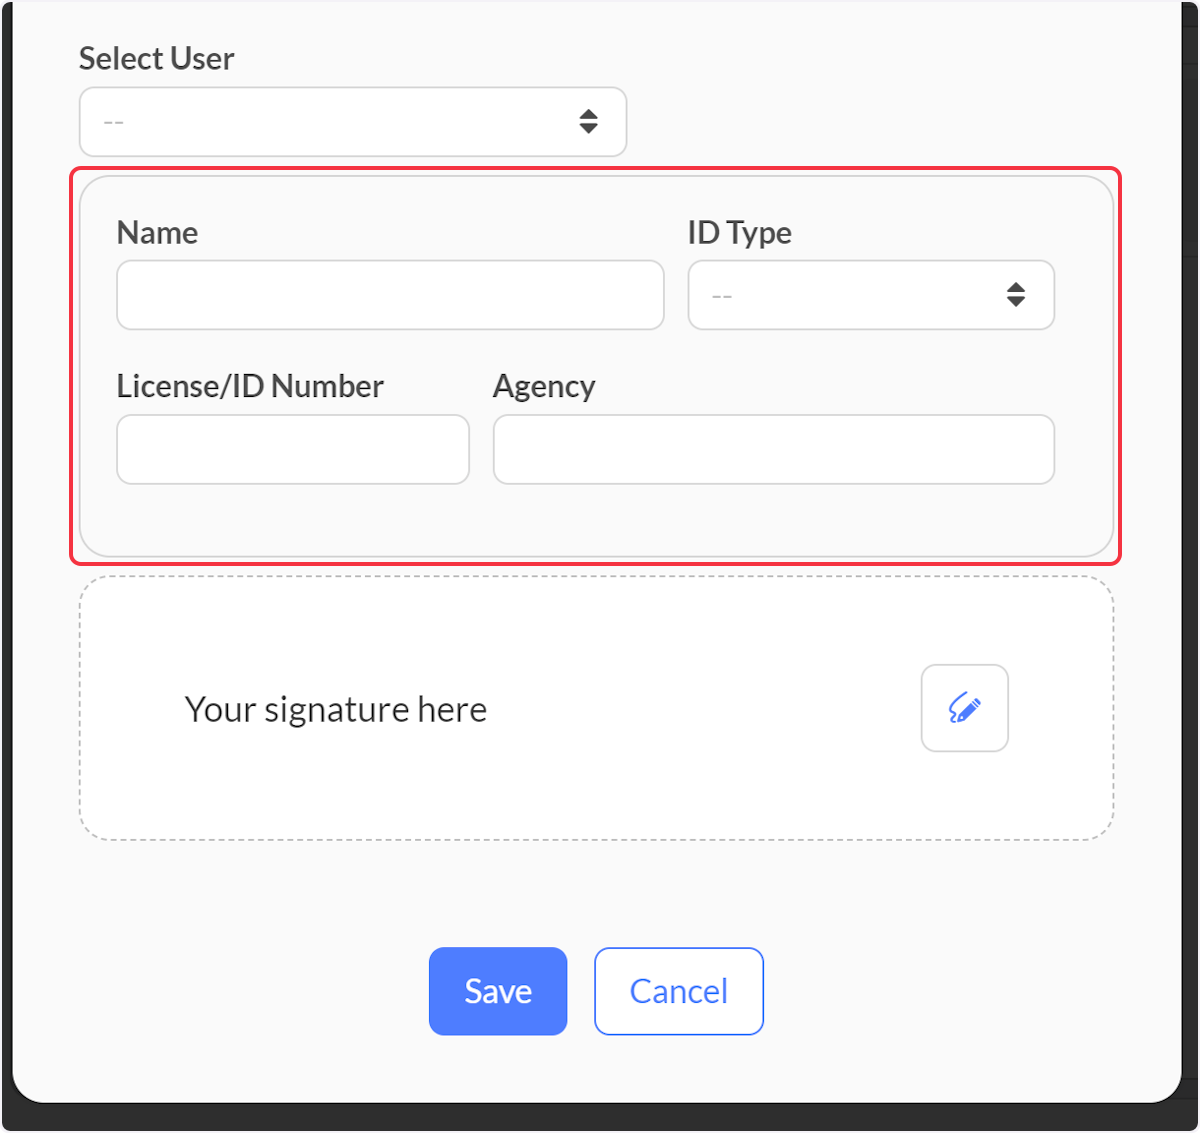 If obtaining signature from outside your agency then fill in the fields and have them sign then select save.